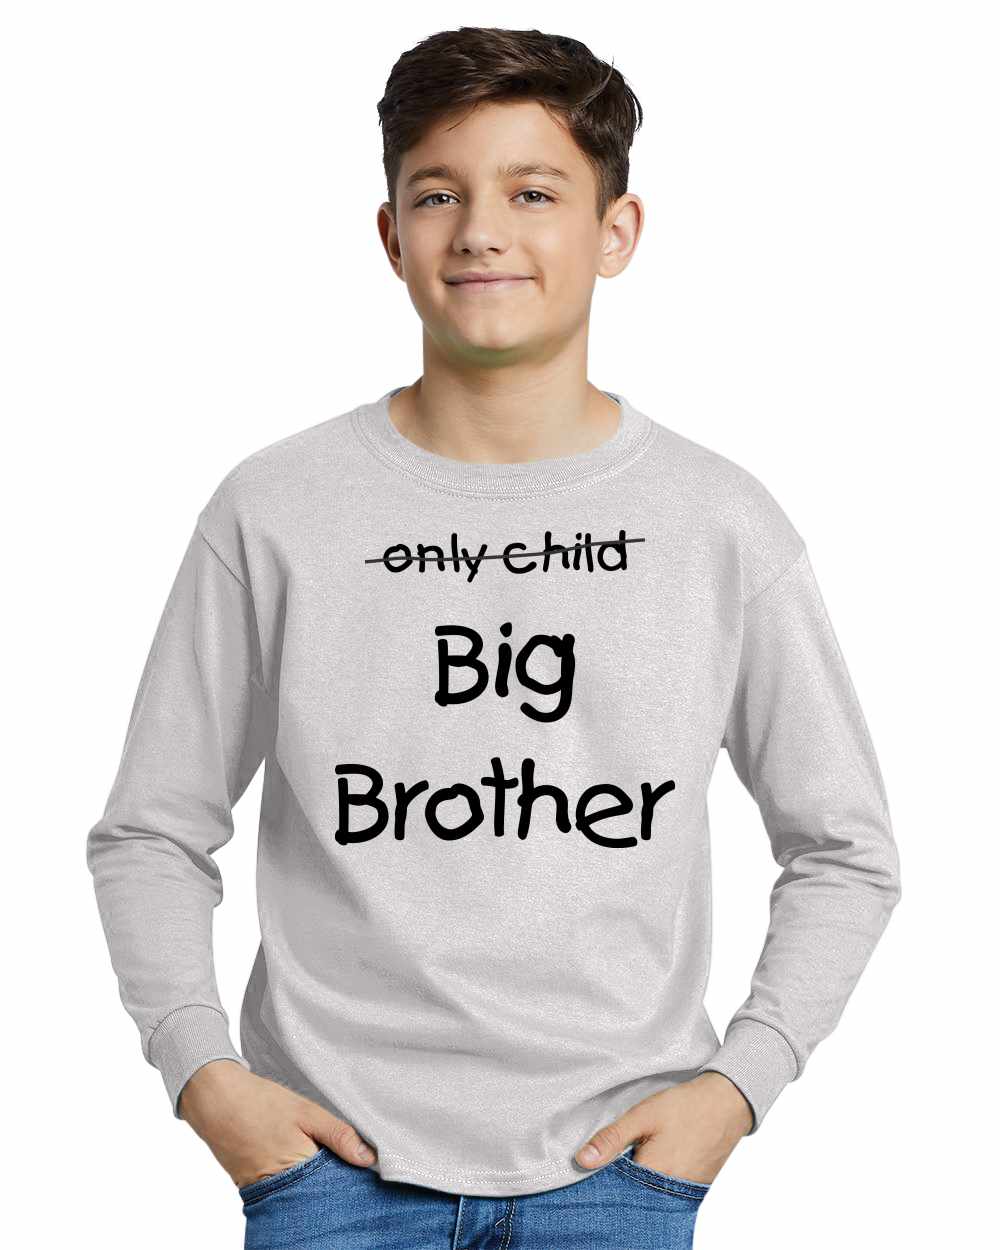 Only Child BIG BROTHER on Youth Long Sleeve Shirt (#965-203)